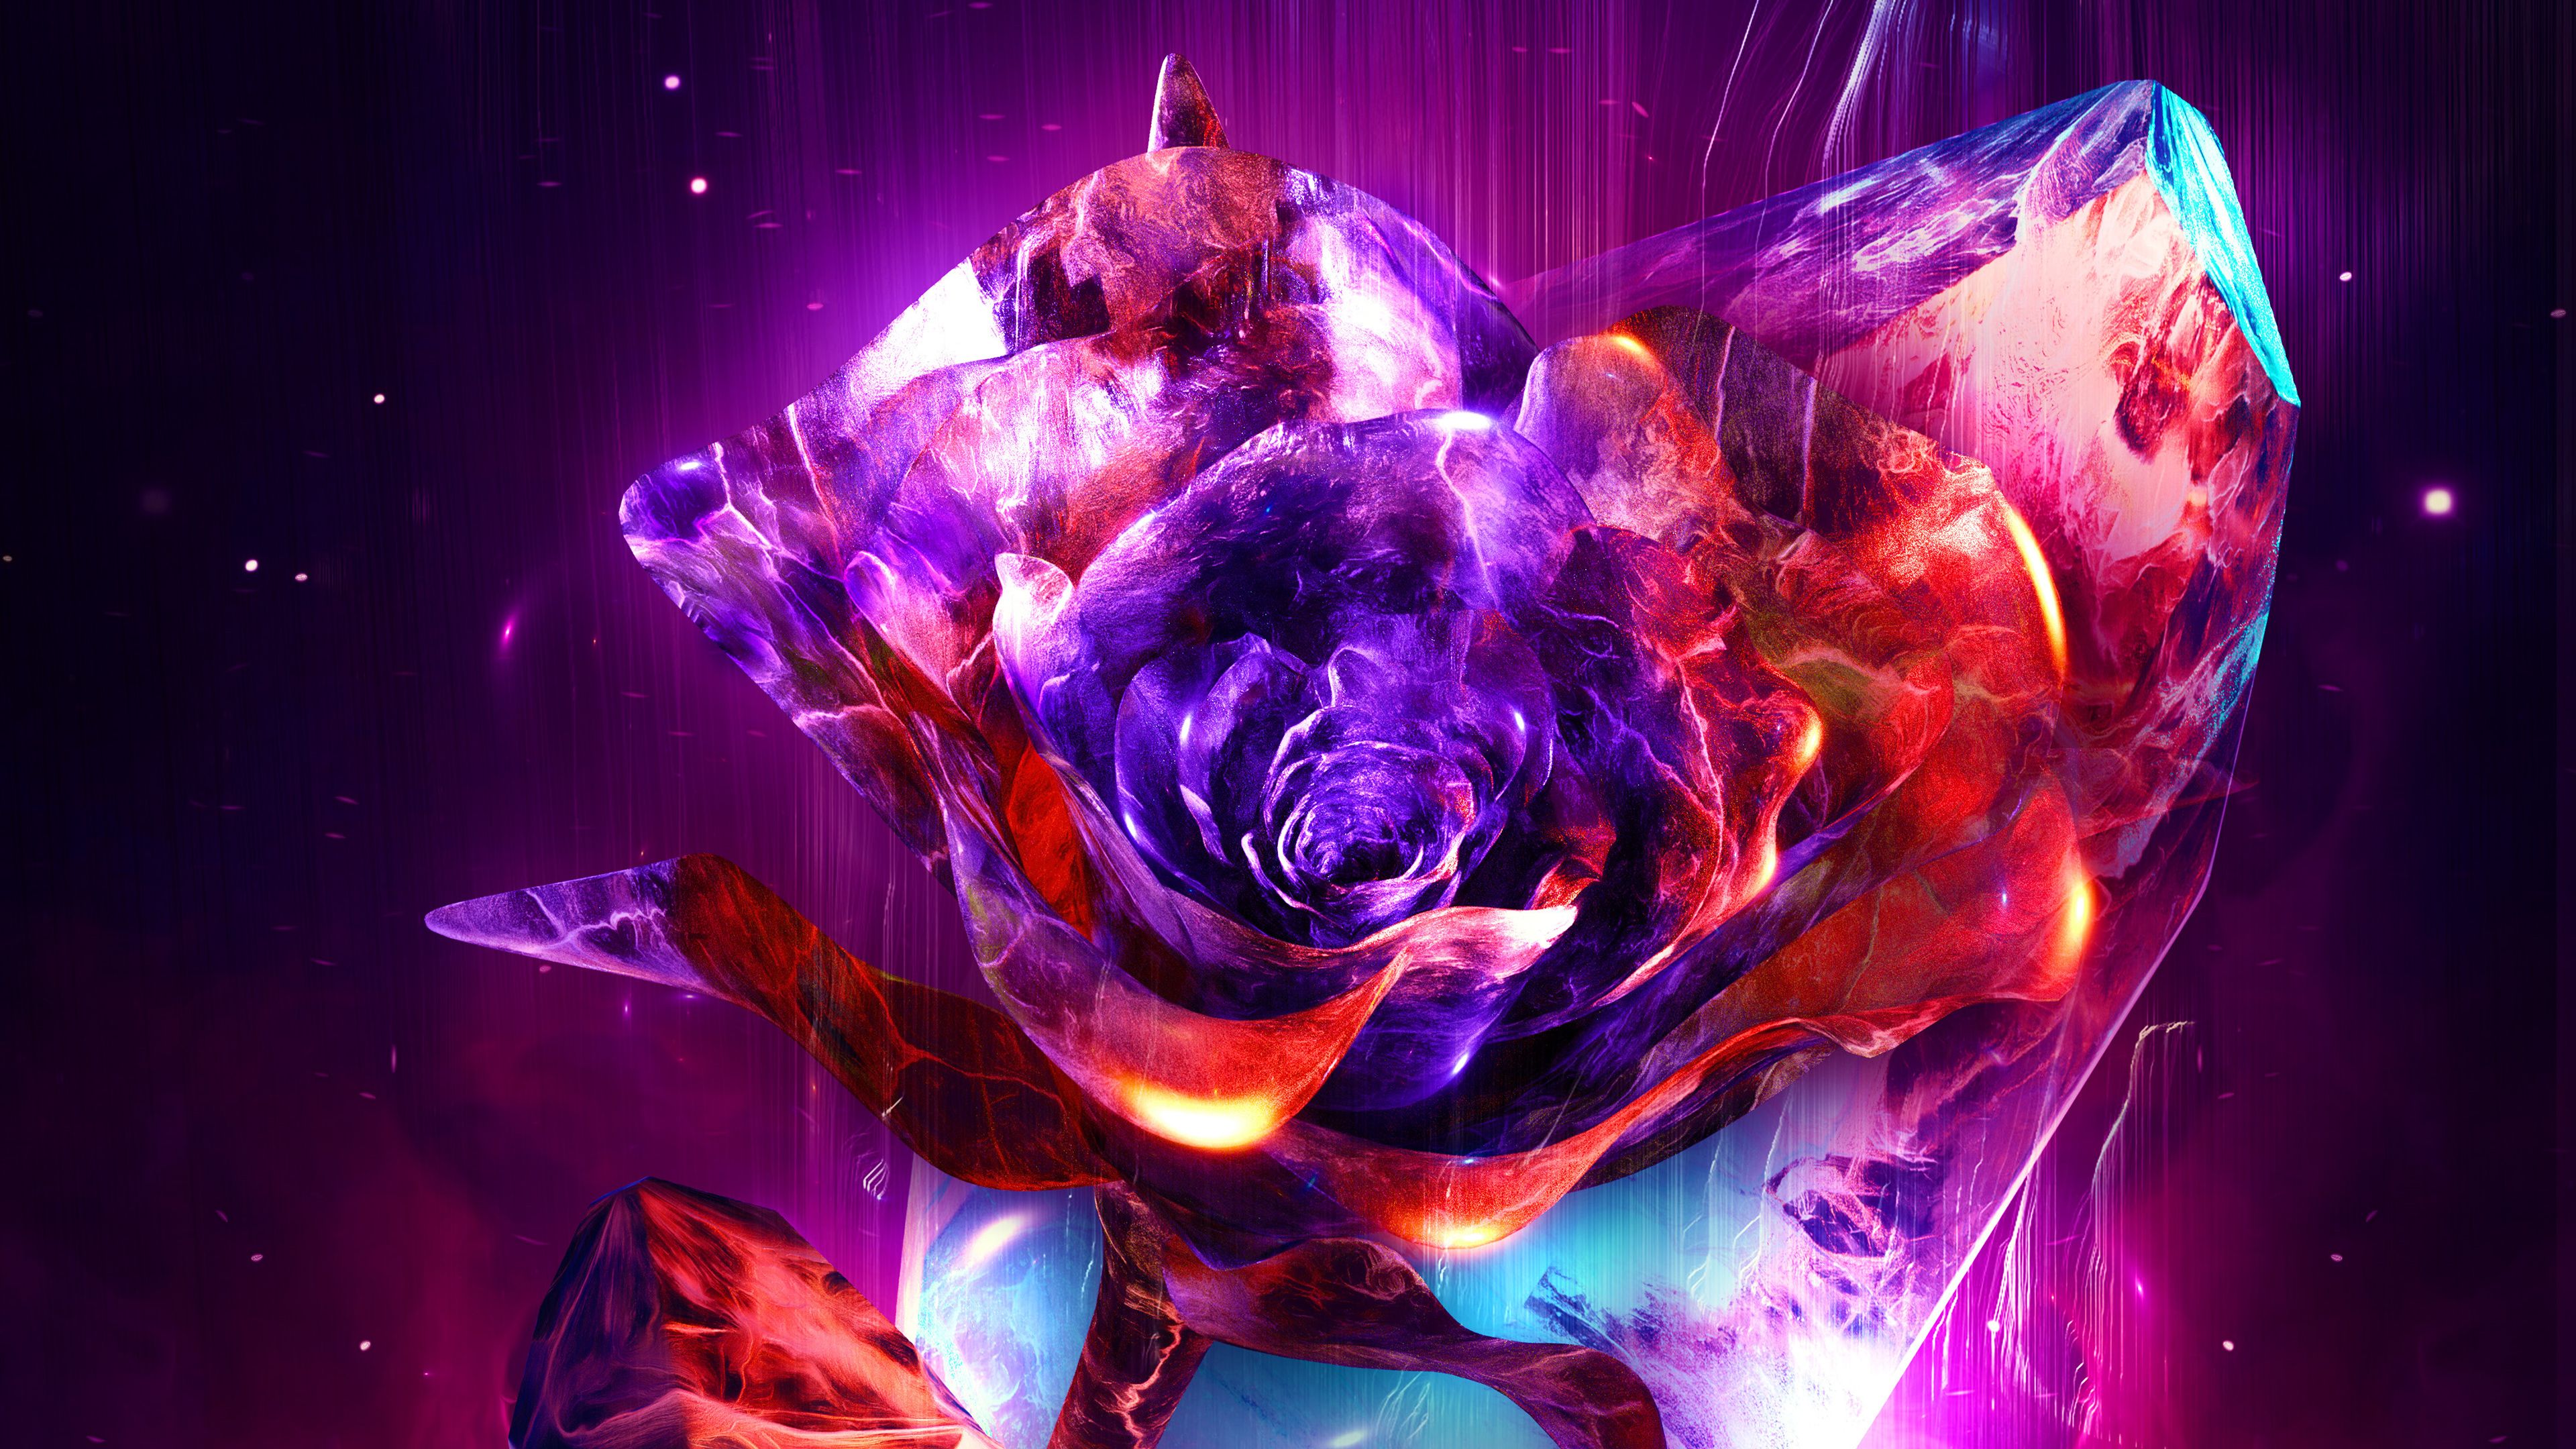 Rose with fire abstract Wallpaper 4k Ultra HD